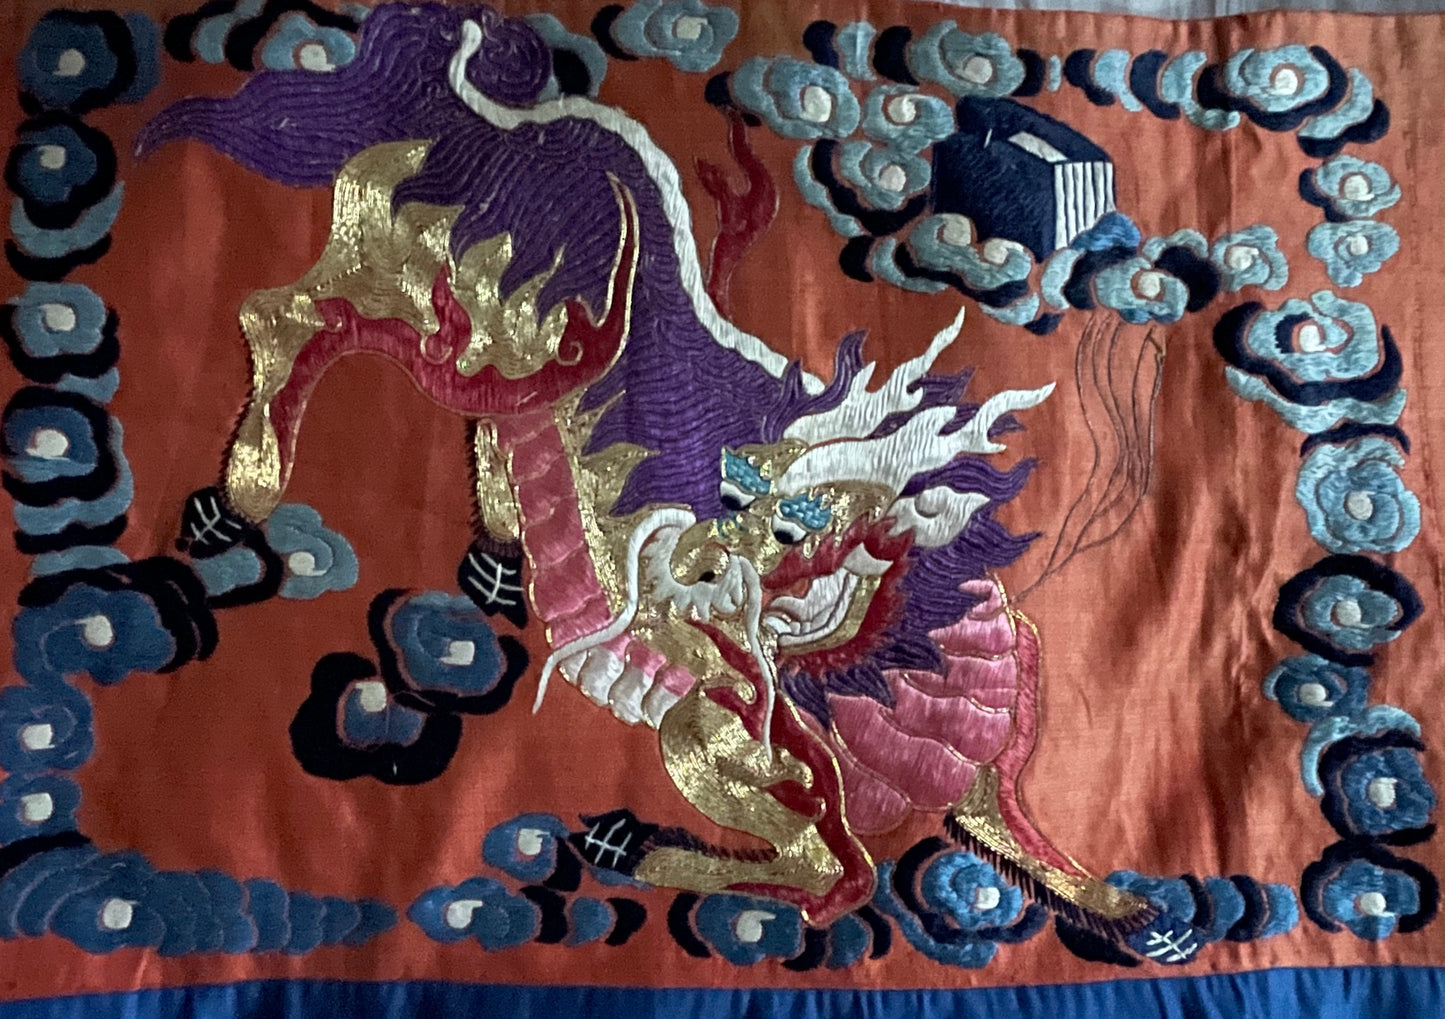 An antique Chinese wall hanging - embroidery on silk